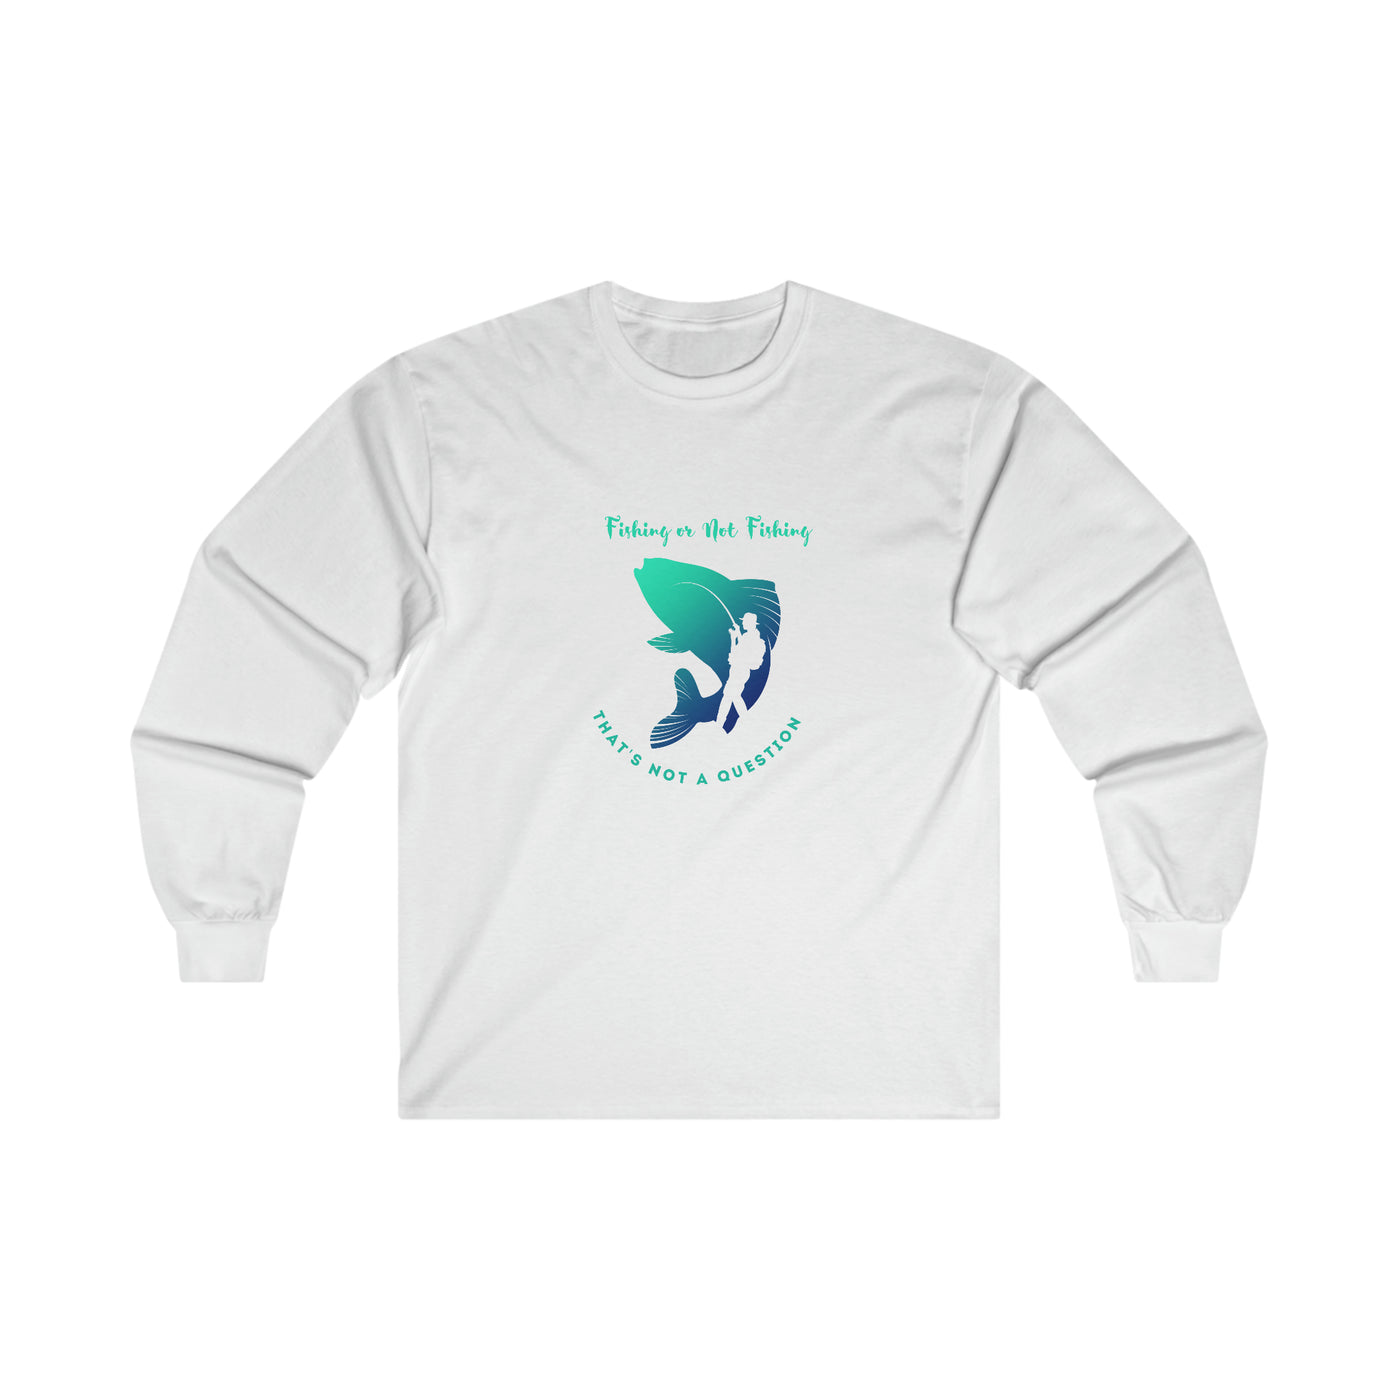 fishing or not fishing is not a question Ultra Cotton Long Sleeve Tee